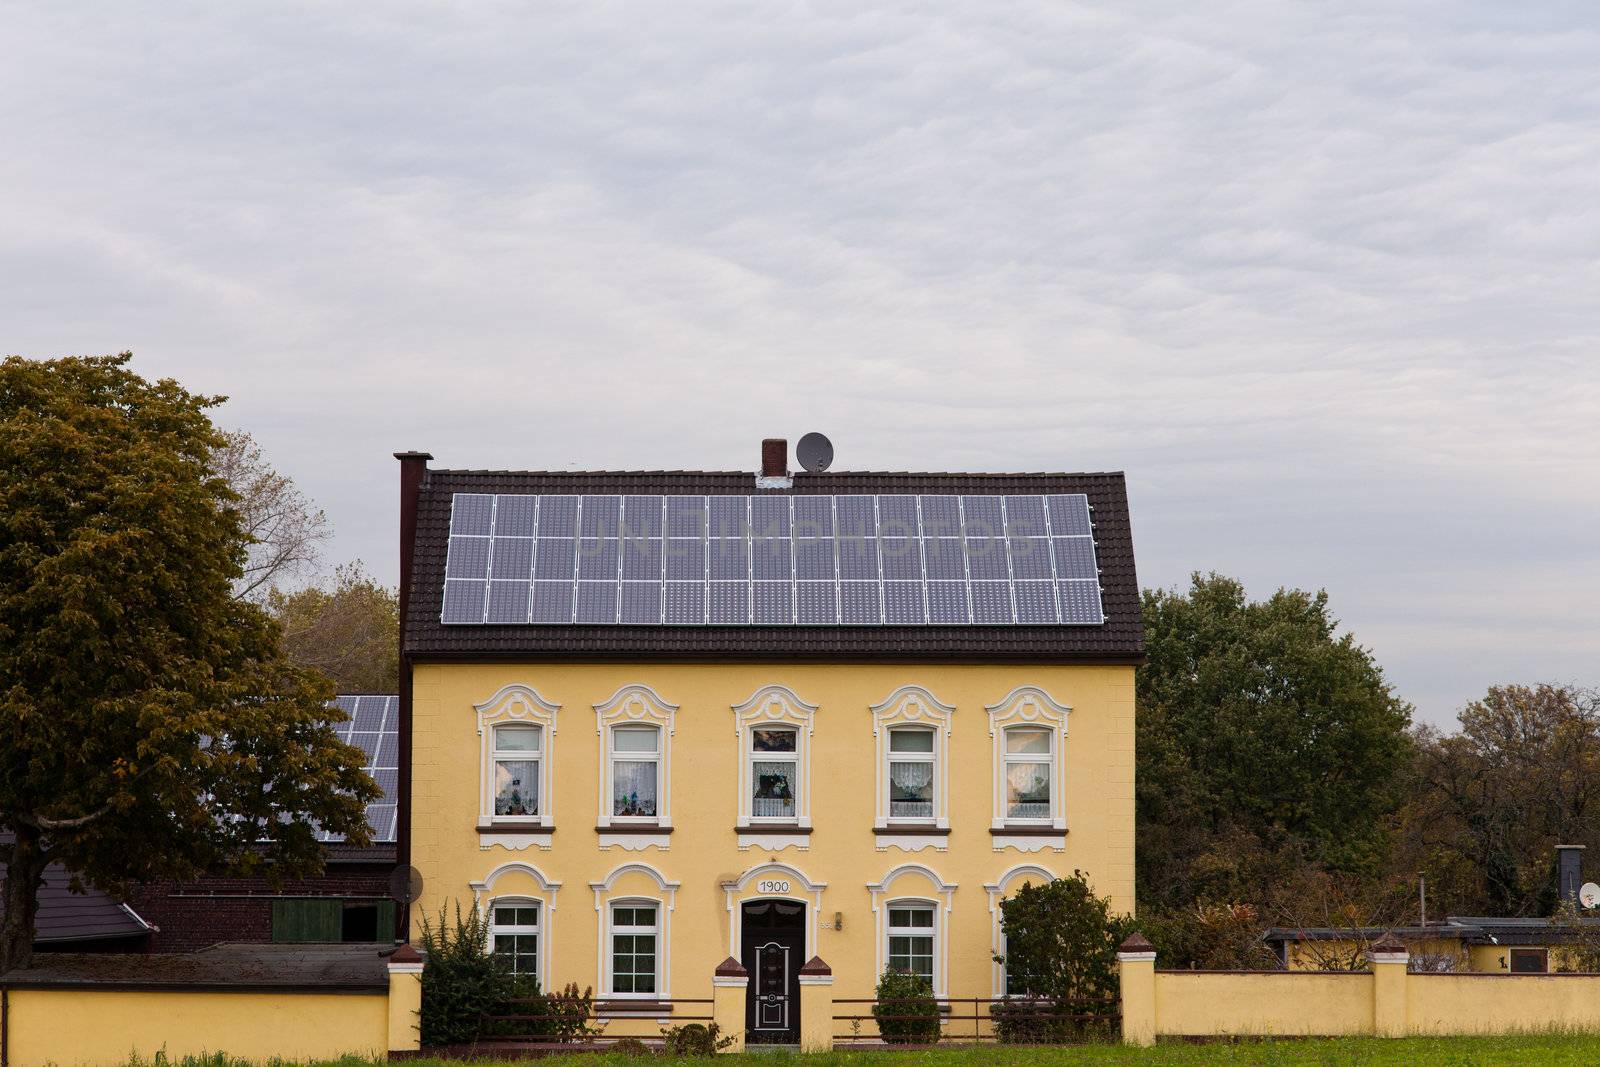 Historic house with solar panels on roof by PiLens